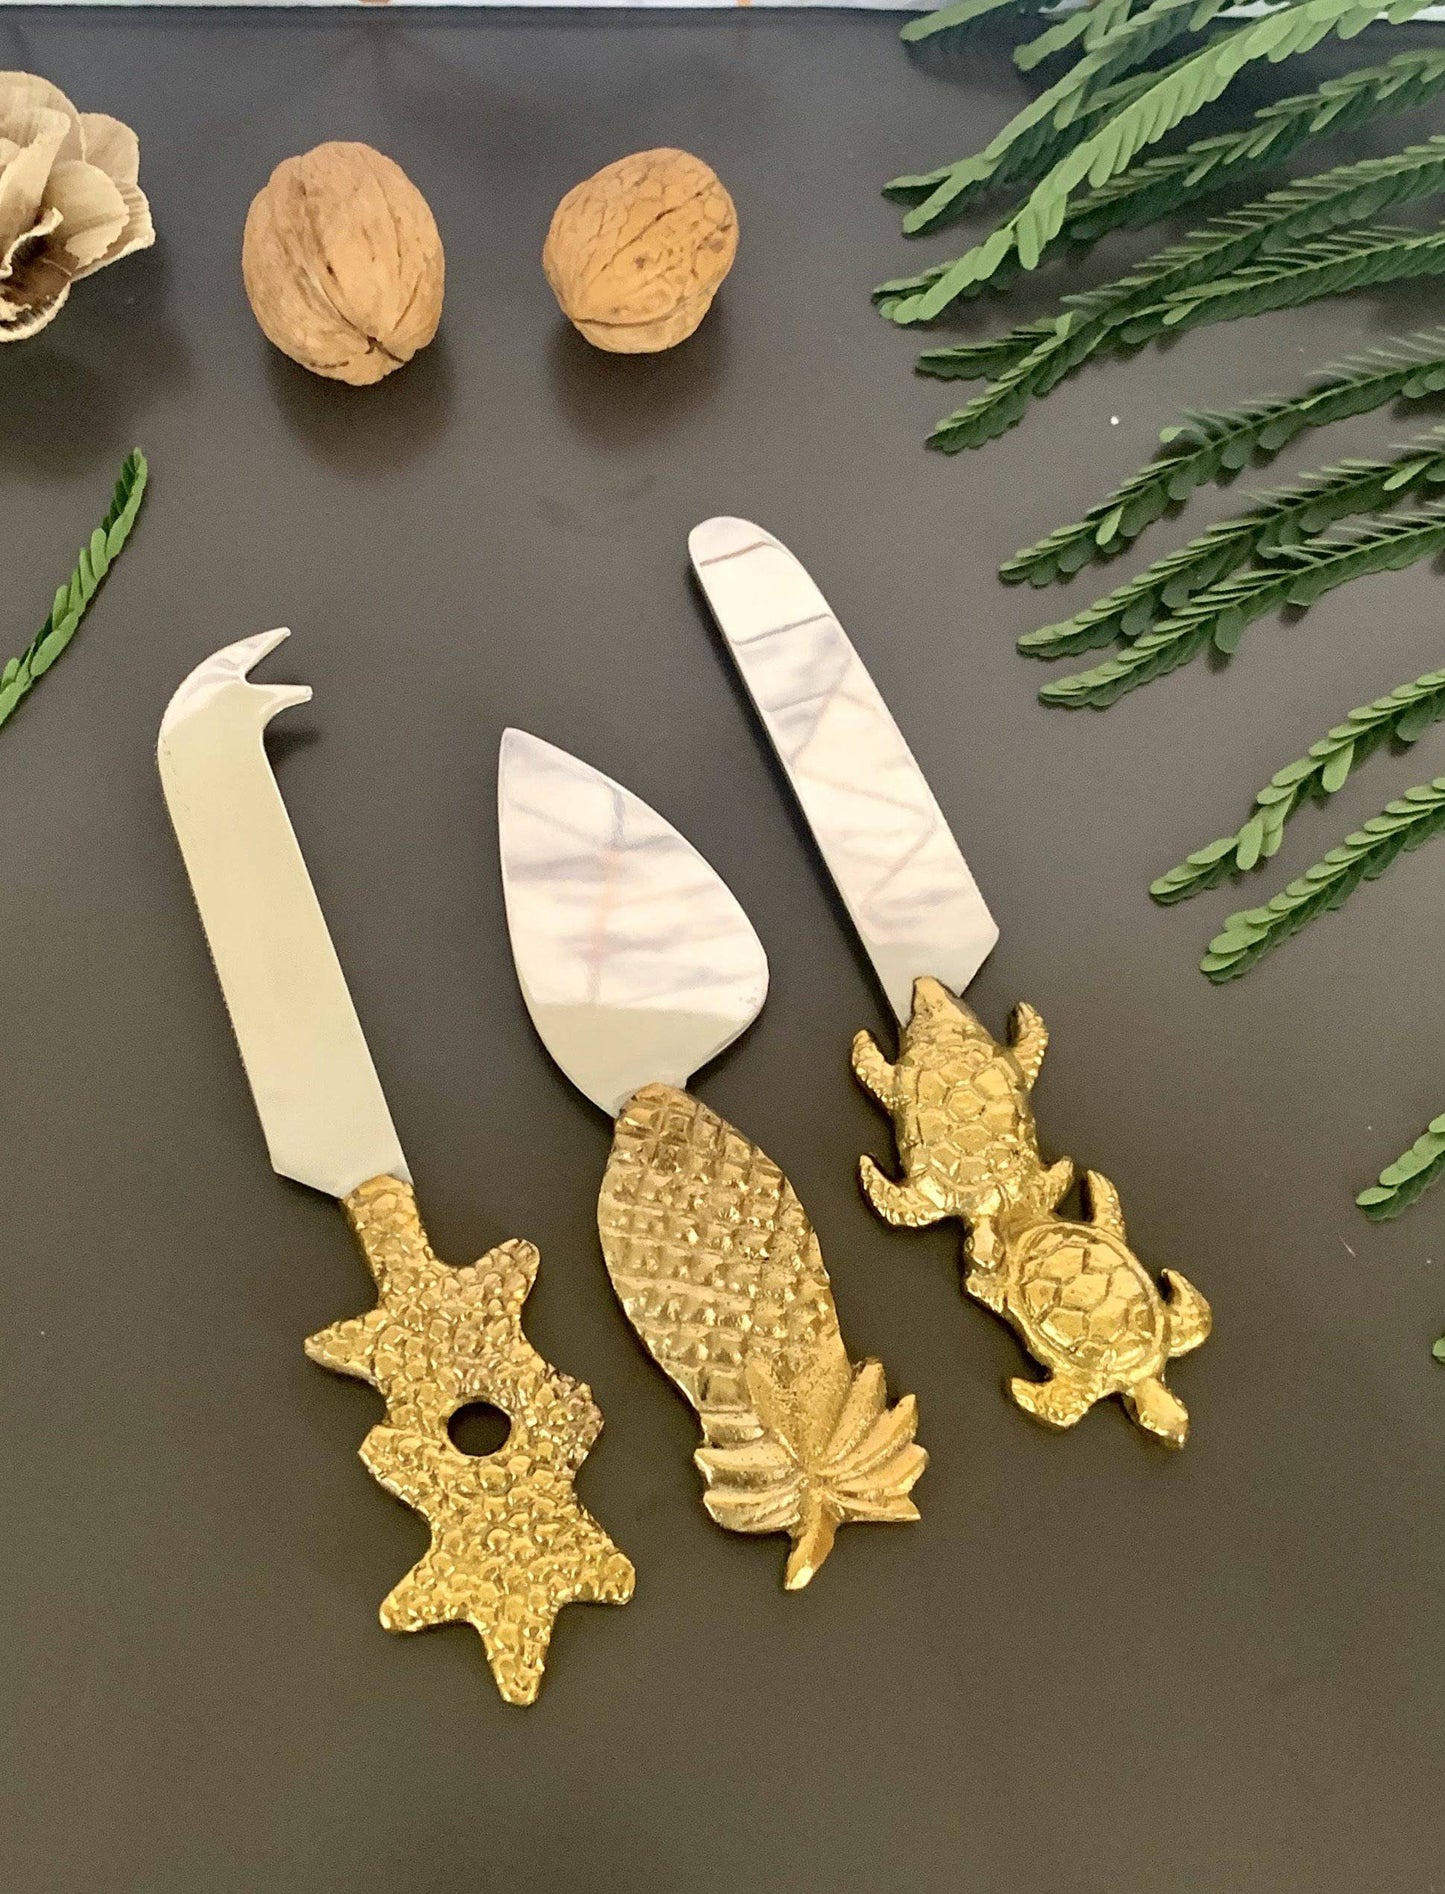 Tropical Sea Stainless Steel Cheese Knives (set of 3) - The Decor Circle